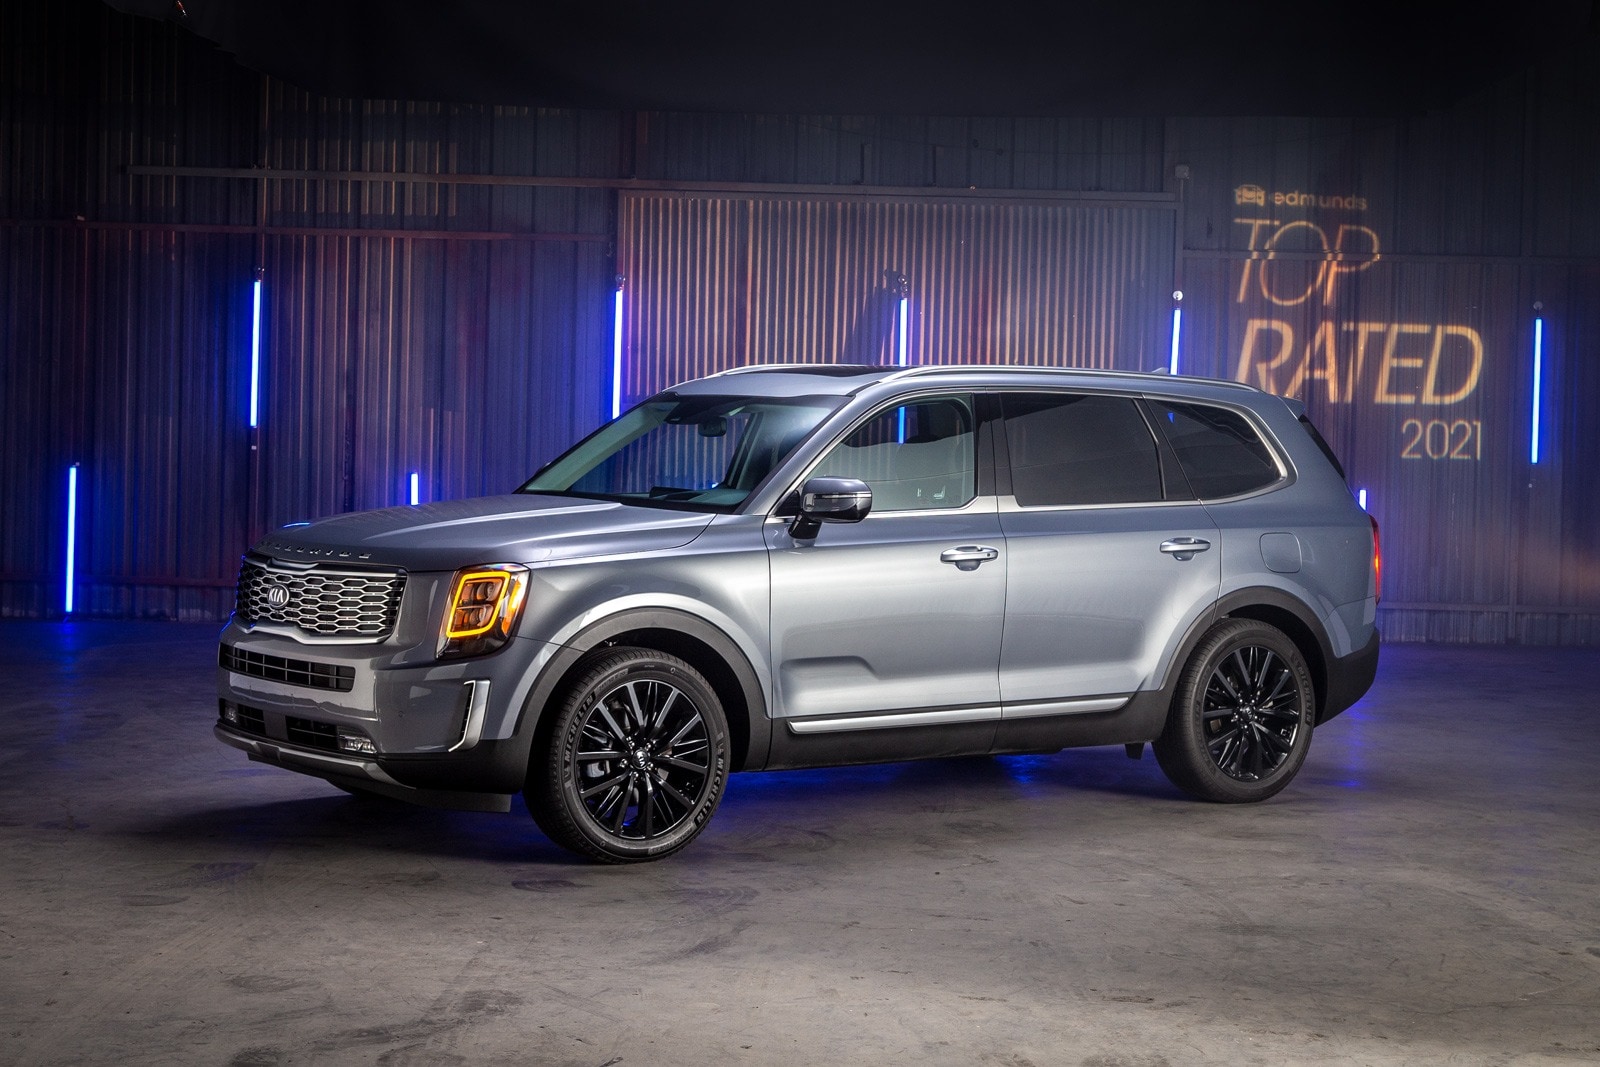 2021 Kia Telluride: Edmunds Top Rated SUV | Edmunds Top Rated Awards 2021